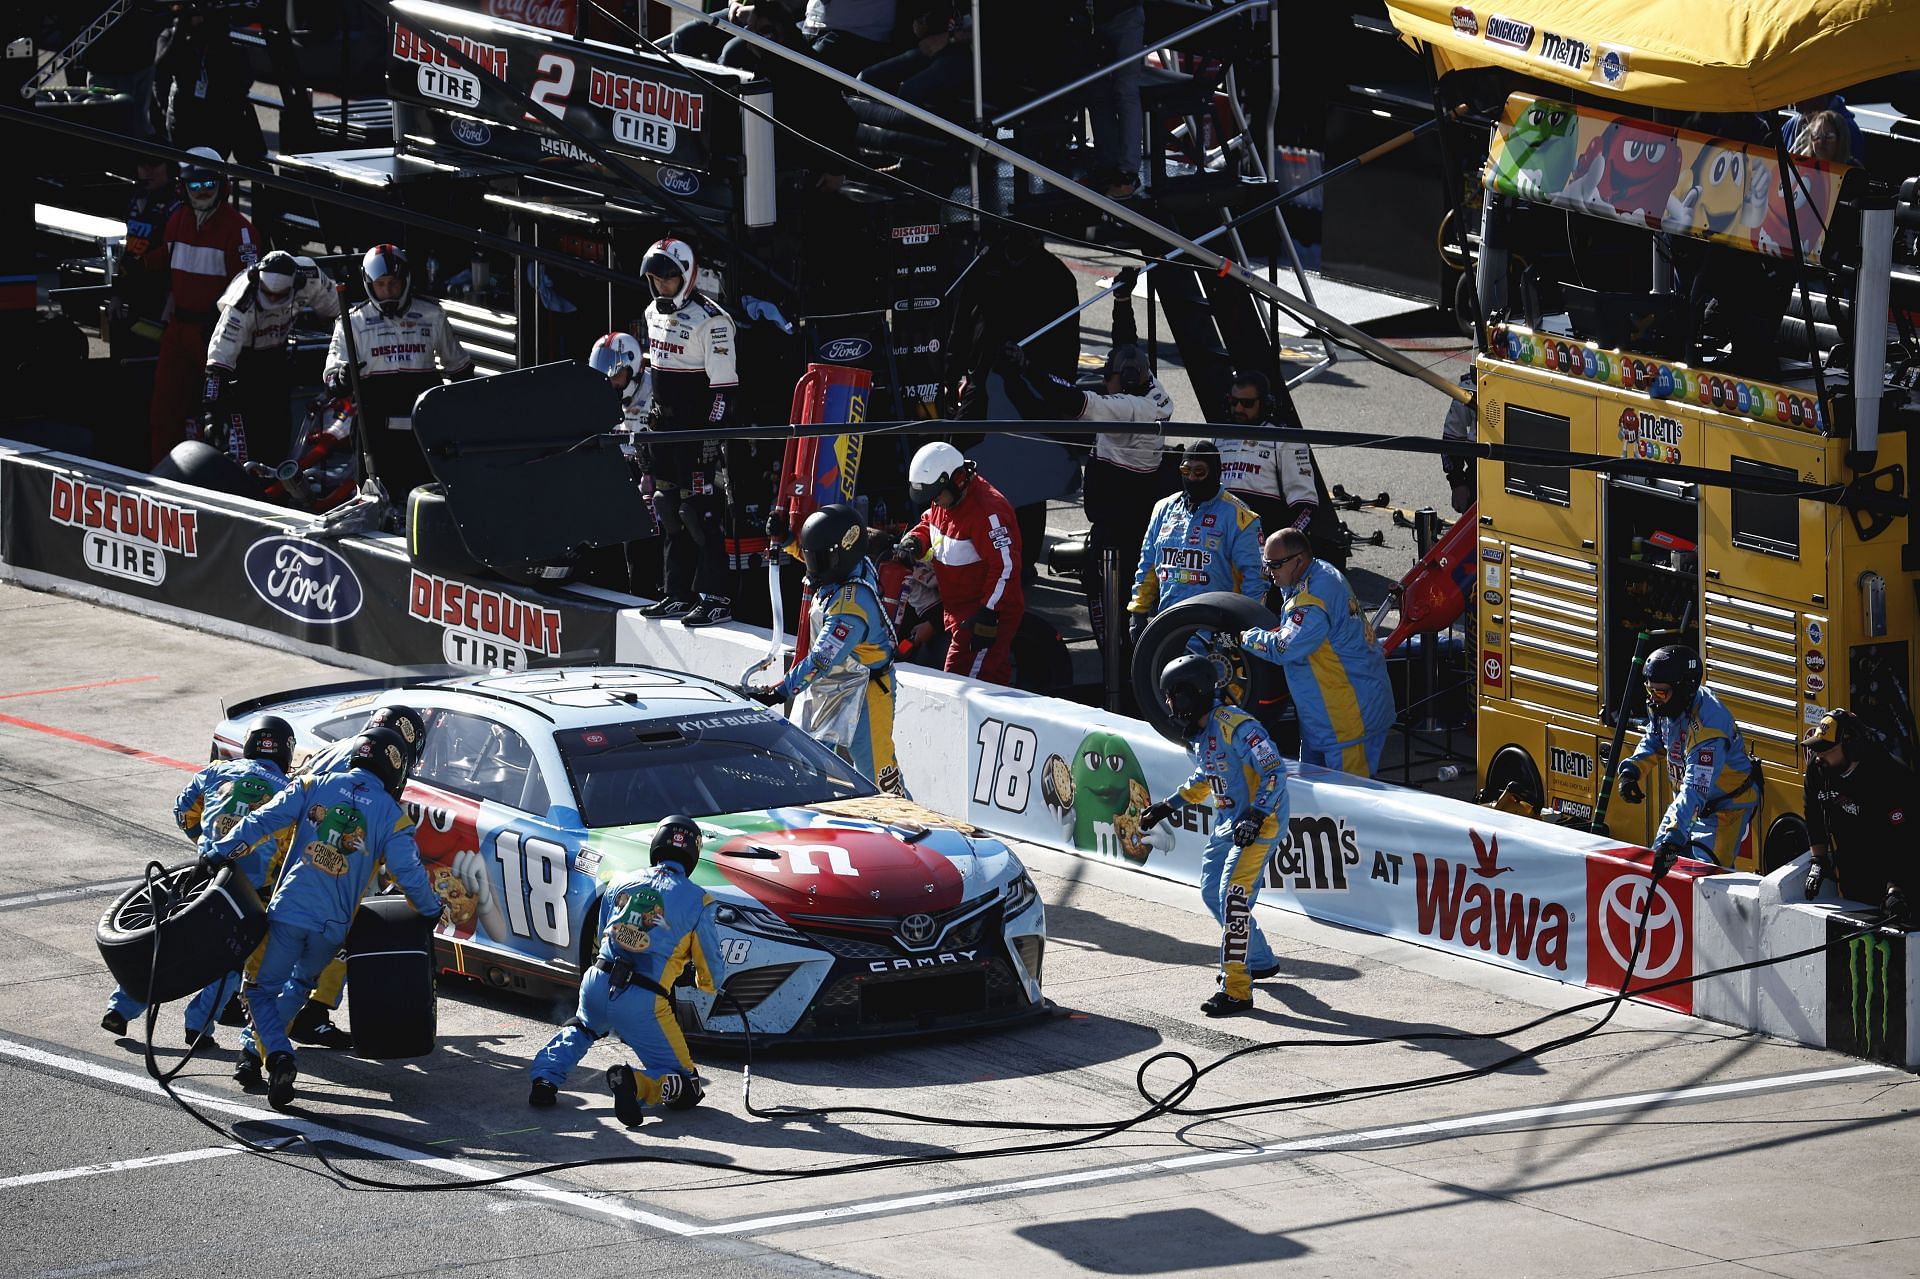 Kyle Busch pits during the NASCAR Cup Series Toyota Owners 400 at Richmond Raceway. (Photo by Jared C. Tilton/Getty Images)